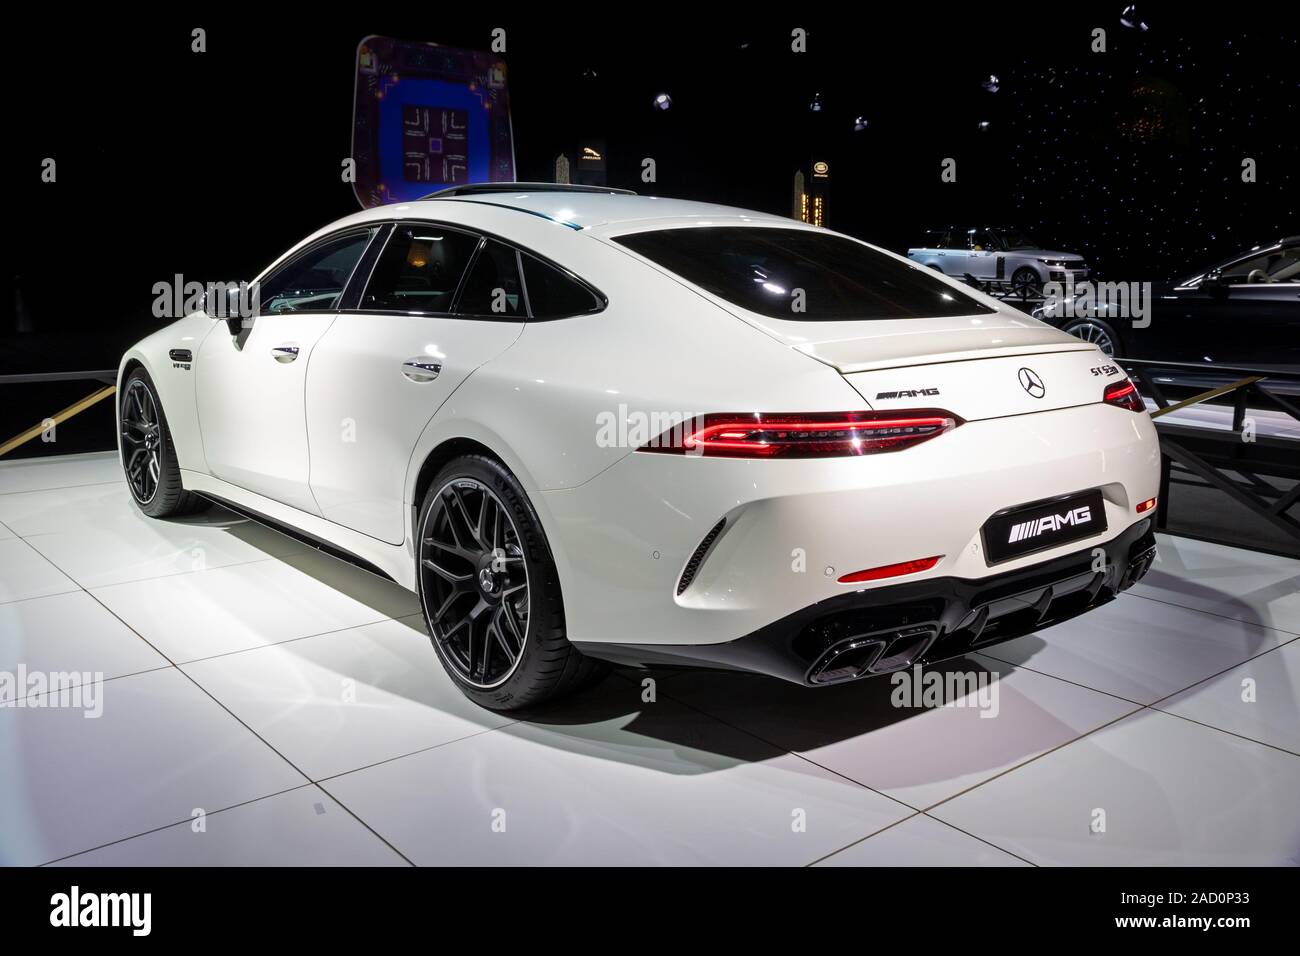 BRUSSELS - JAN 18, 2019: Mercedes-AMG GT 63 S sports car showcased at the Brussels Autosalon 2019 Motor Show. Stock Photo